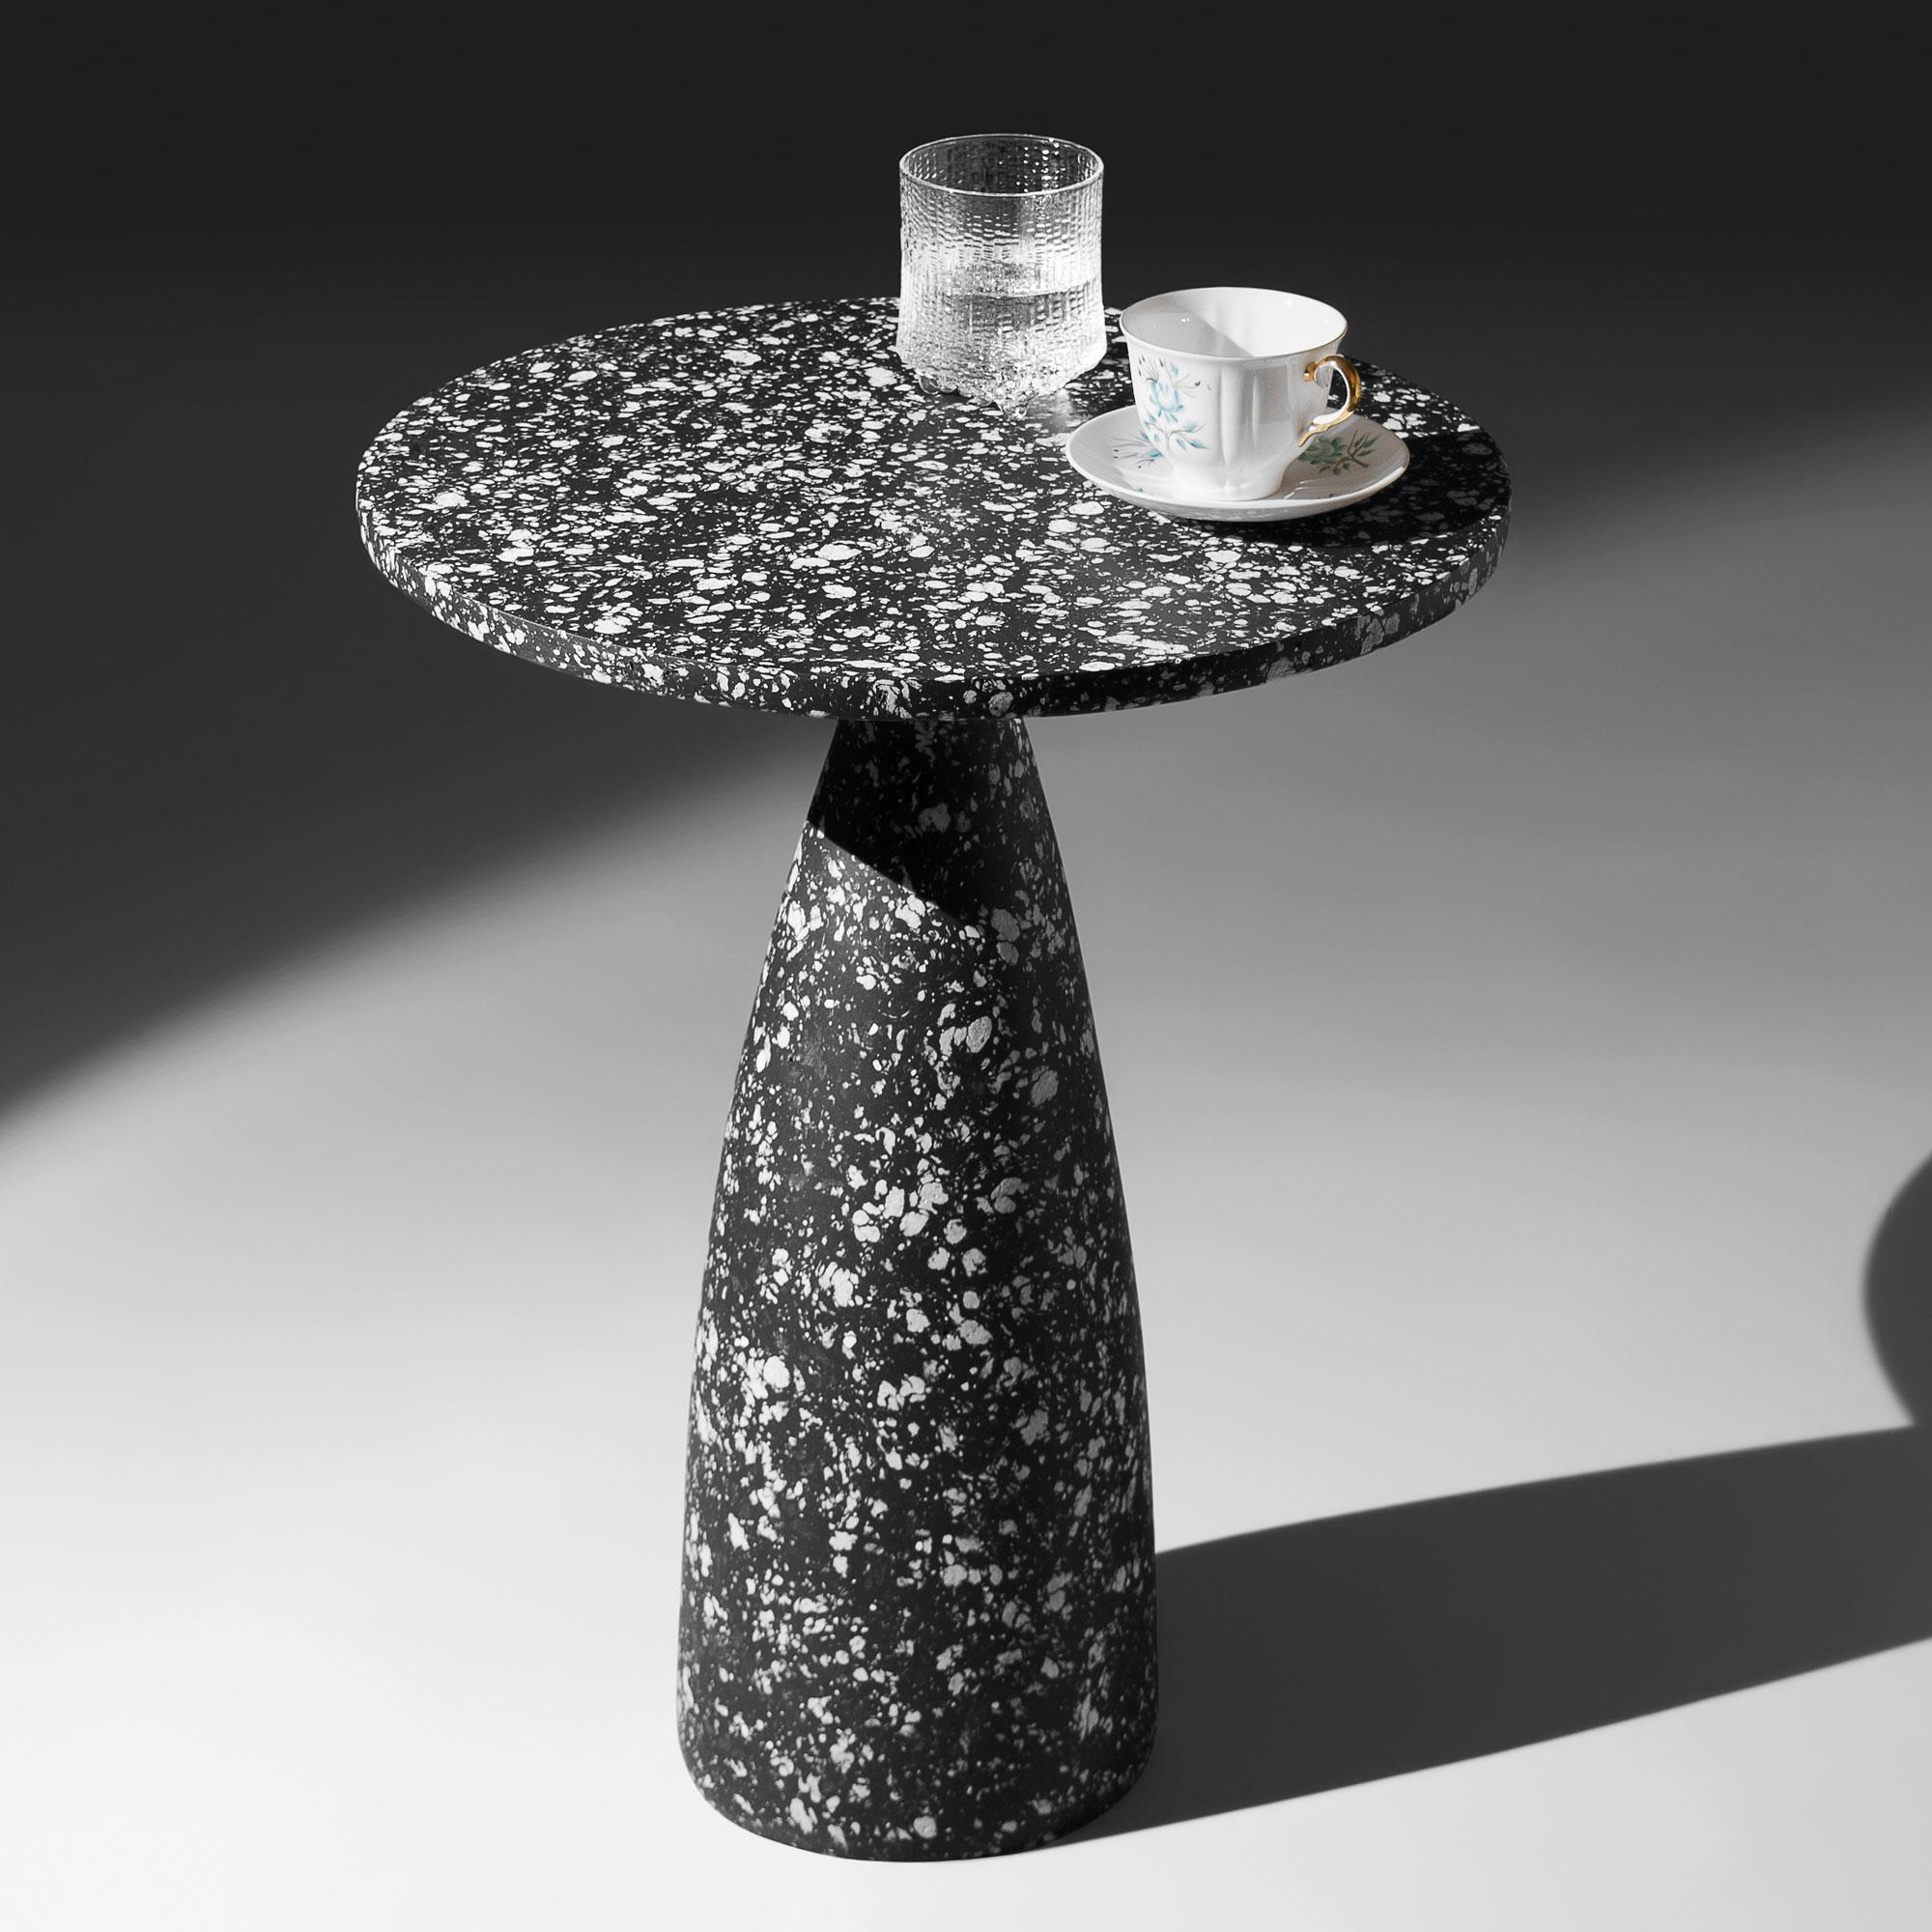 Minimalist side table 40, black, mottled

The mass resembling concrete is the result of various experiments. It is a mixture of several components: the largest part of which is paper mass. Although paper is often associated with fragility, when